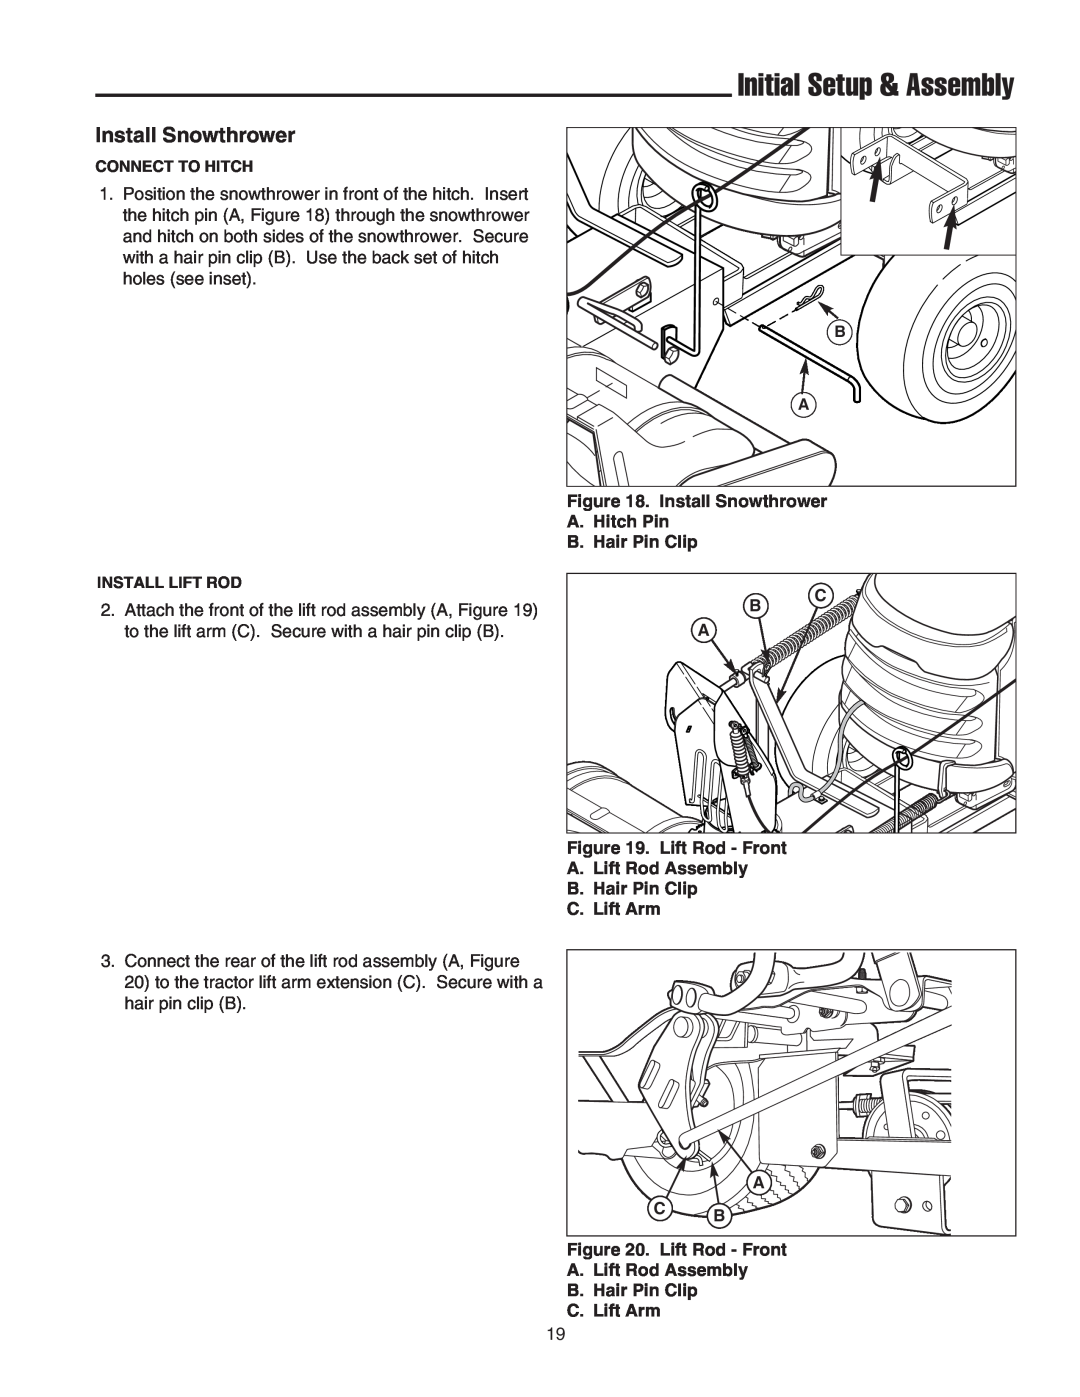 Snapper 1694295, 1694144, 1694150, 1694296 manual Install Snowthrower, Initial Setup & Assembly 